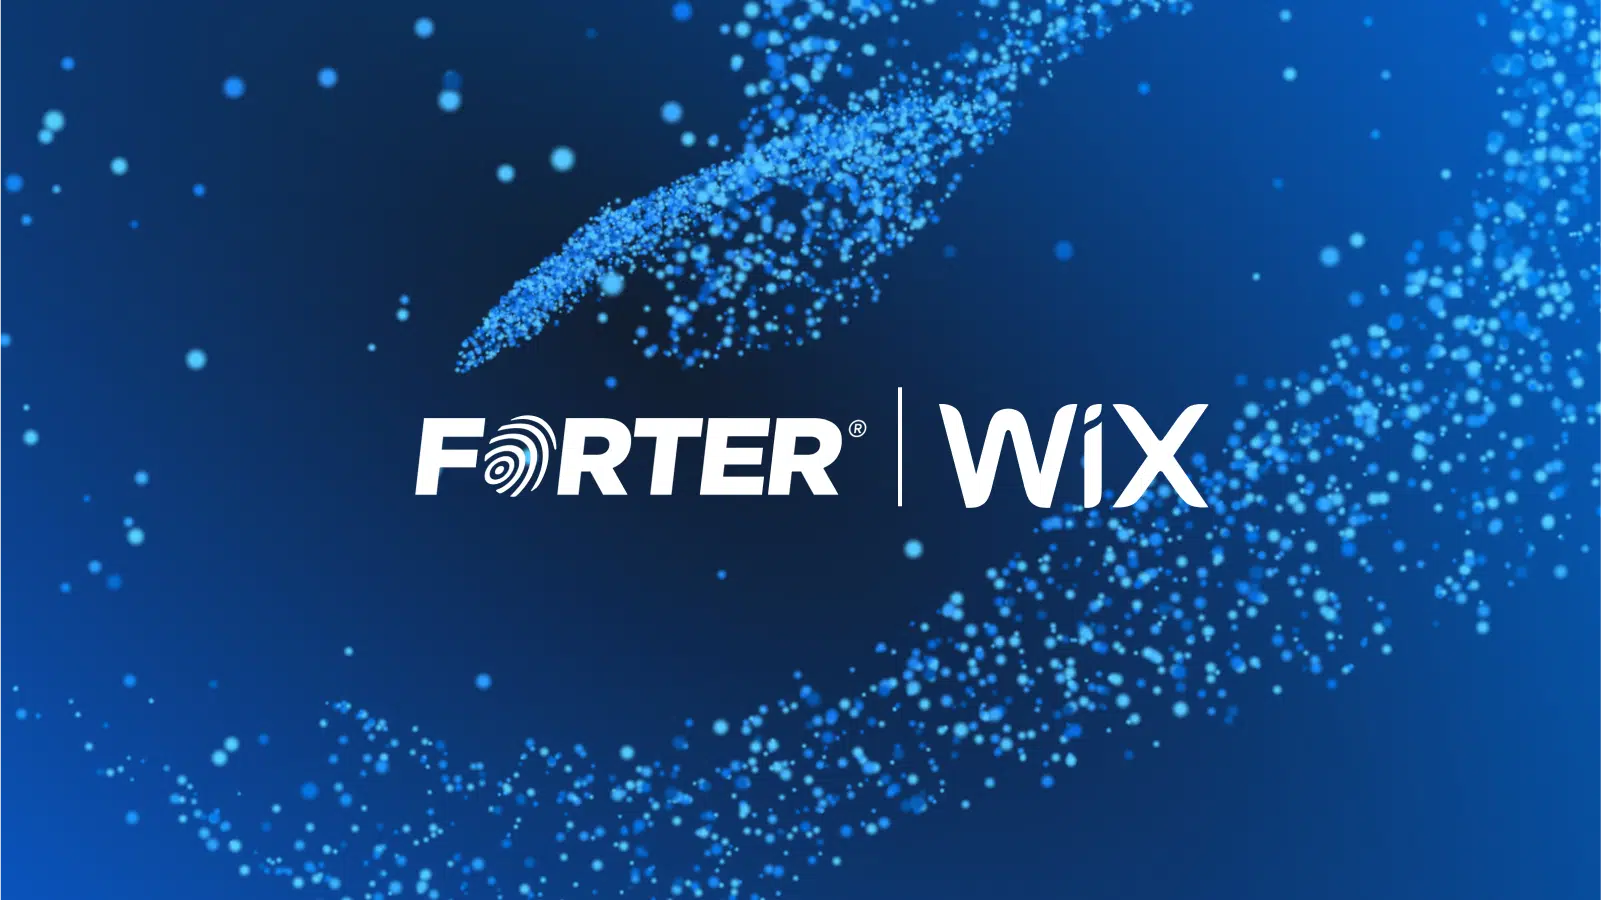 New Partnership Brings Forter’s Fraud Prevention Solution to Wix Merchants